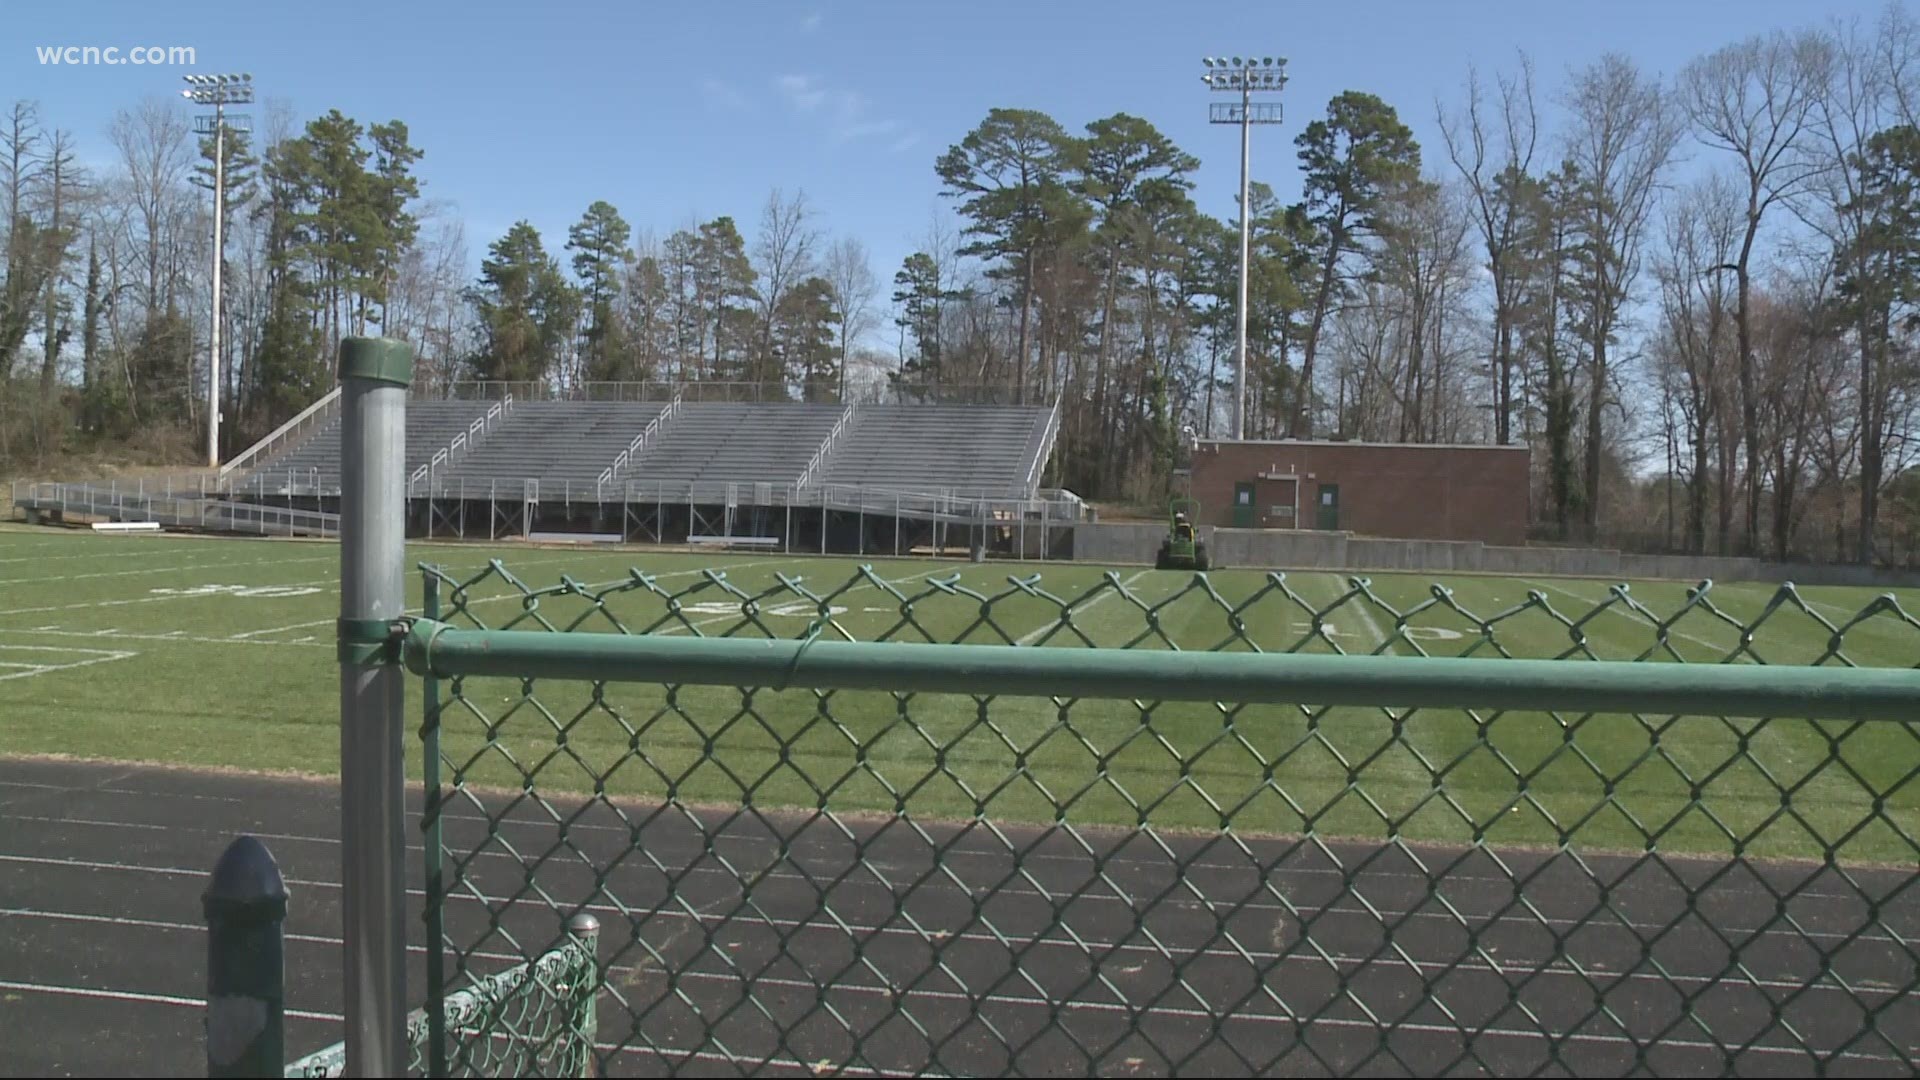 Starting March 5, Charlotte-Mecklenburg Schools will allow up to 500 fans at outdoor sporting events with strict COVID-19 safety measures in place.